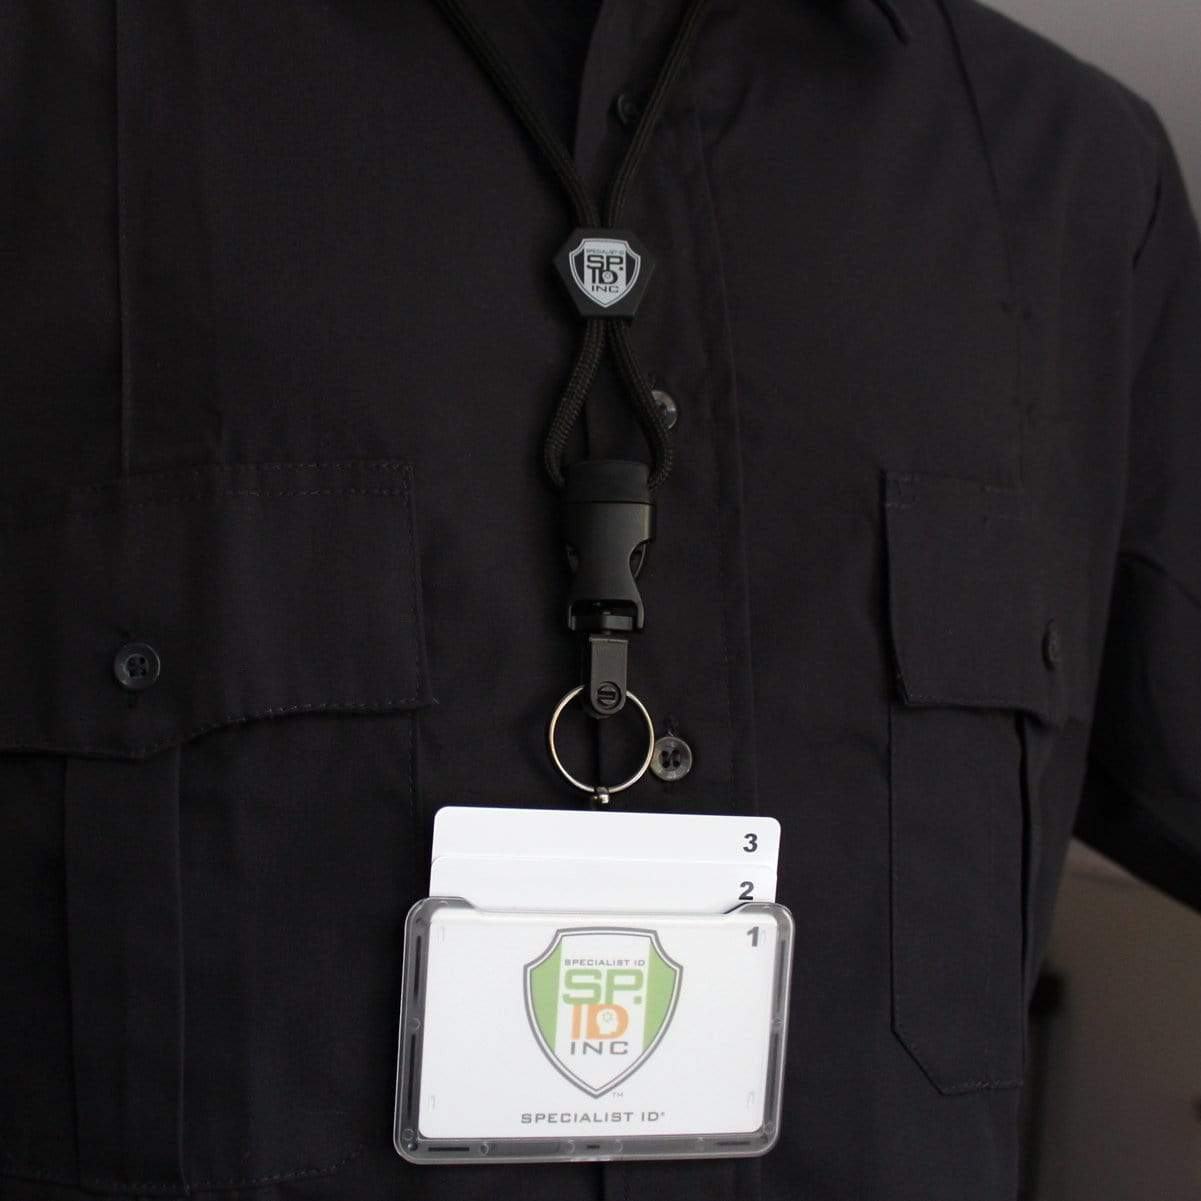  Specialist ID Black Dual Card ID Badge Holder - Holds 2 Cards  - Rigid Hard Plastic : Badge Holders : Office Products